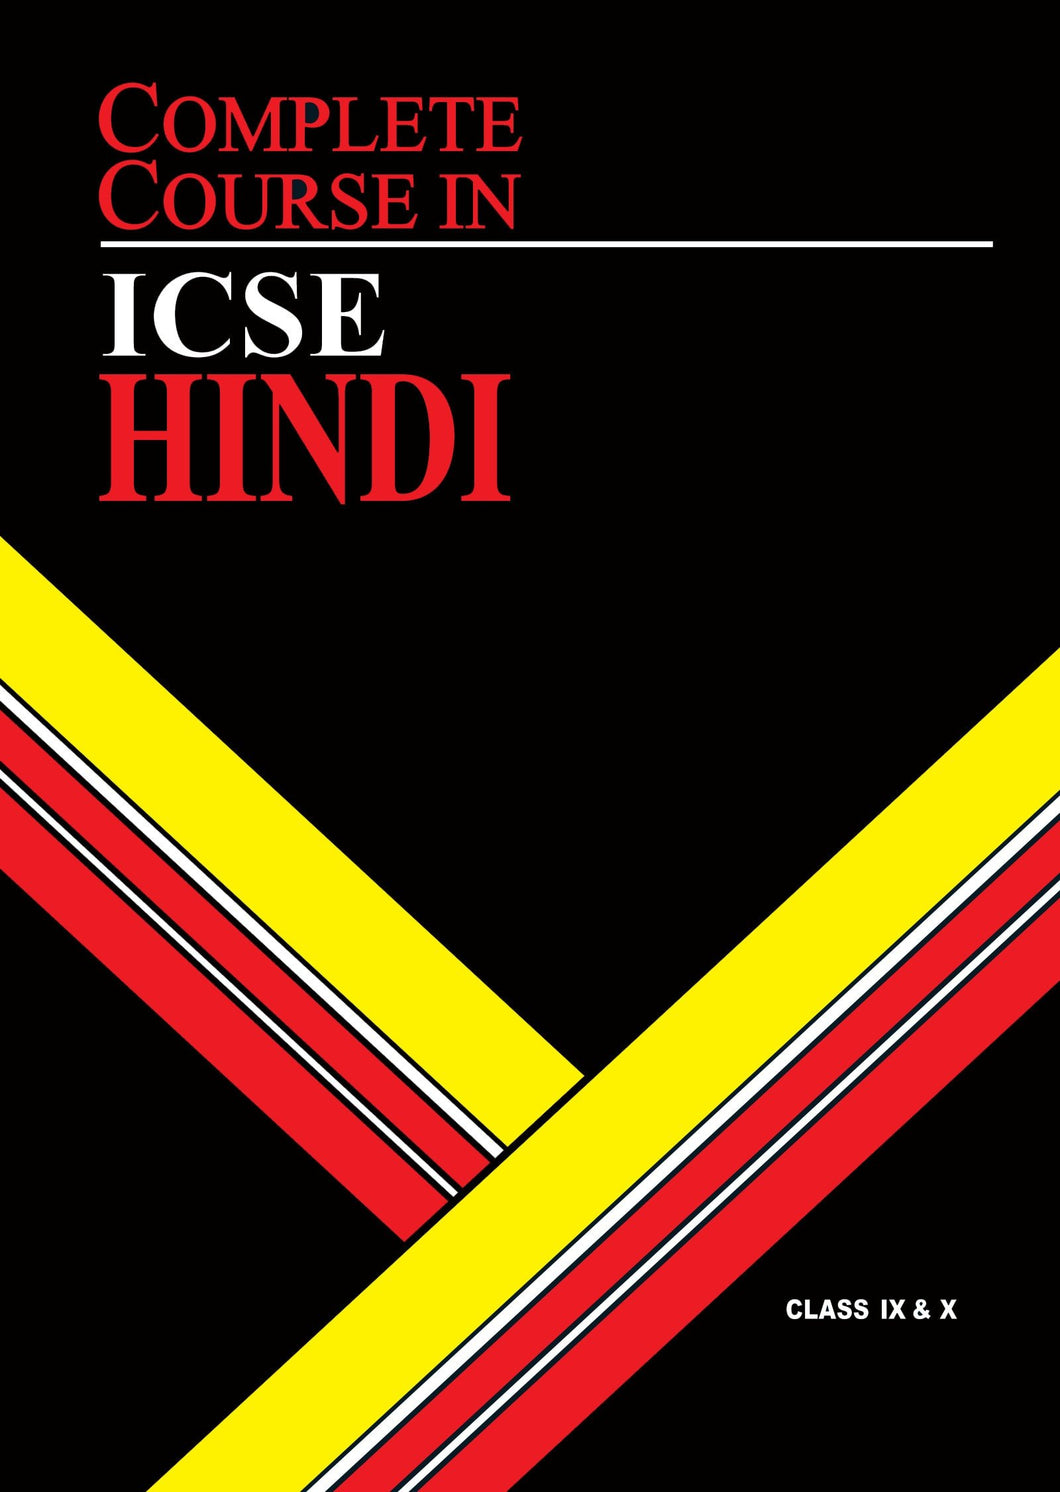 Oswal Complete Course Hindi: ICSE Class 9 & 10